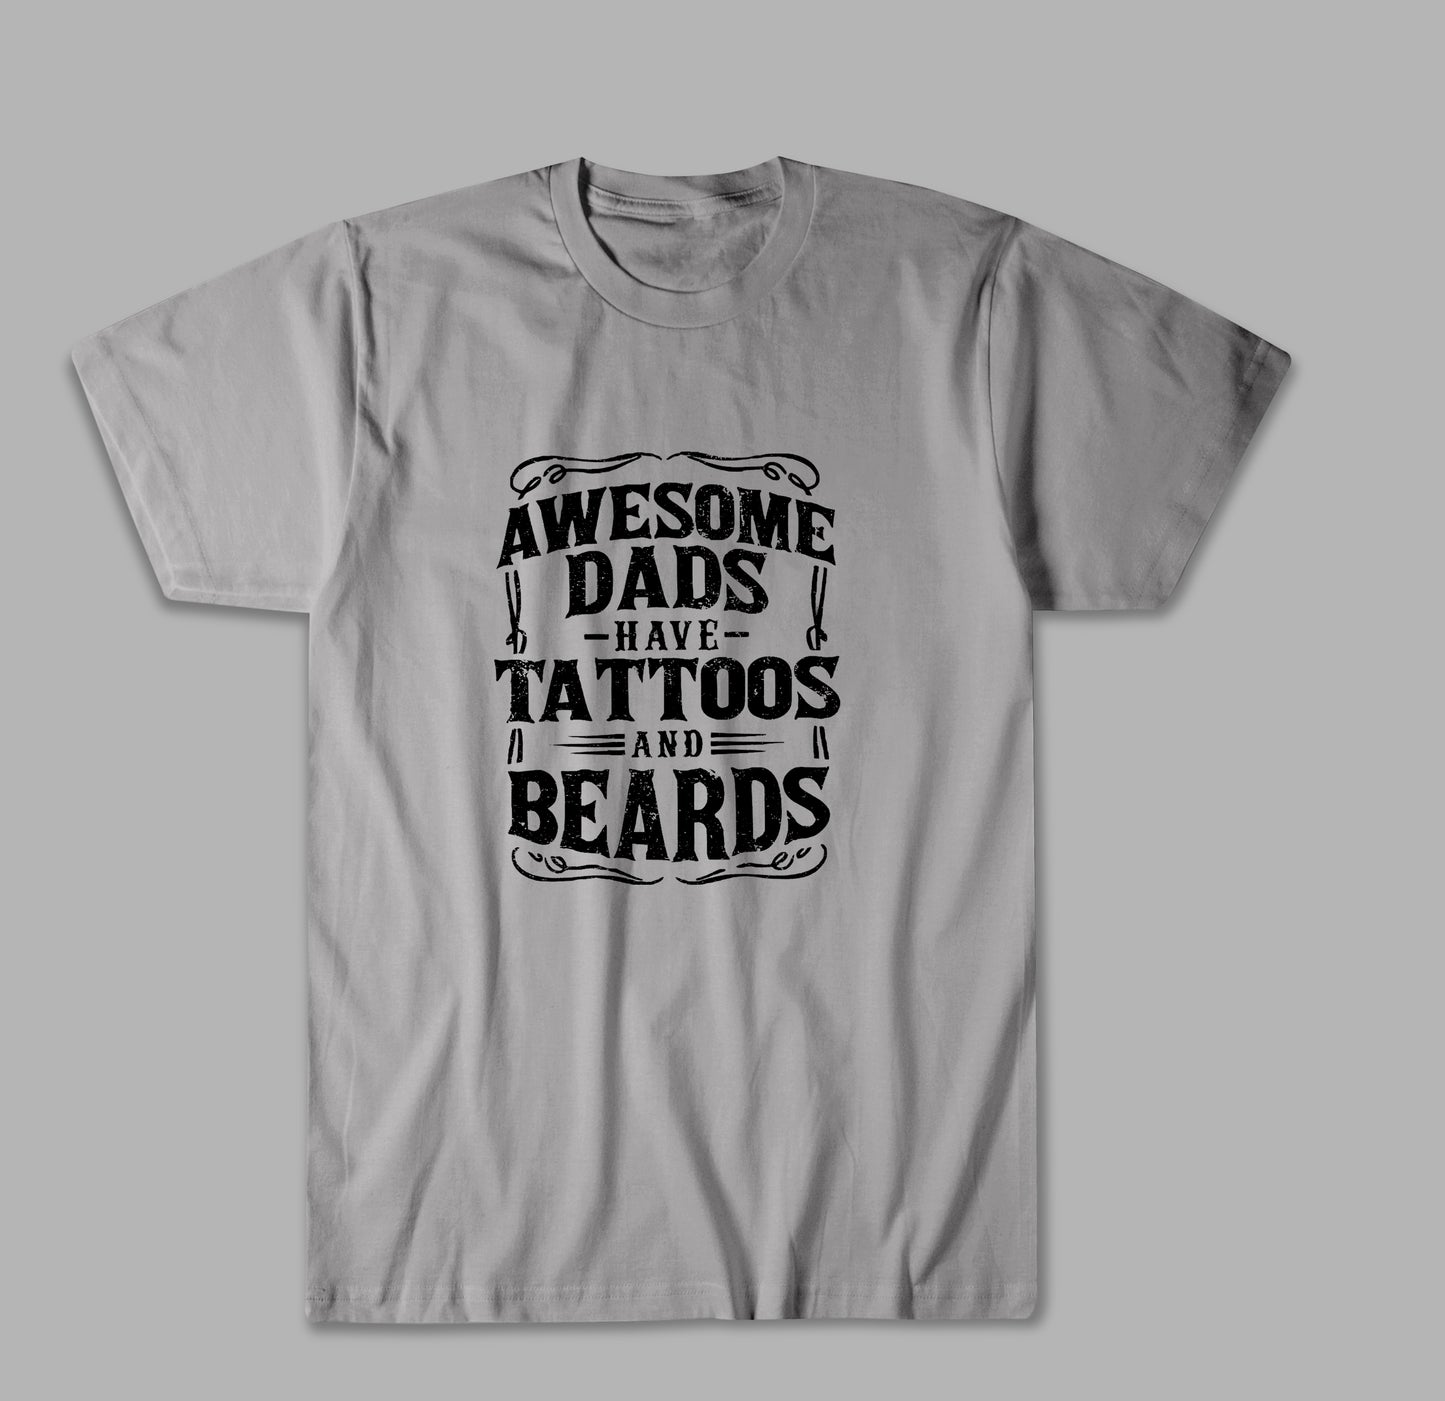 Awesome Dads Have Tattoos and Beards for Fathers Day T Shirt PJ6